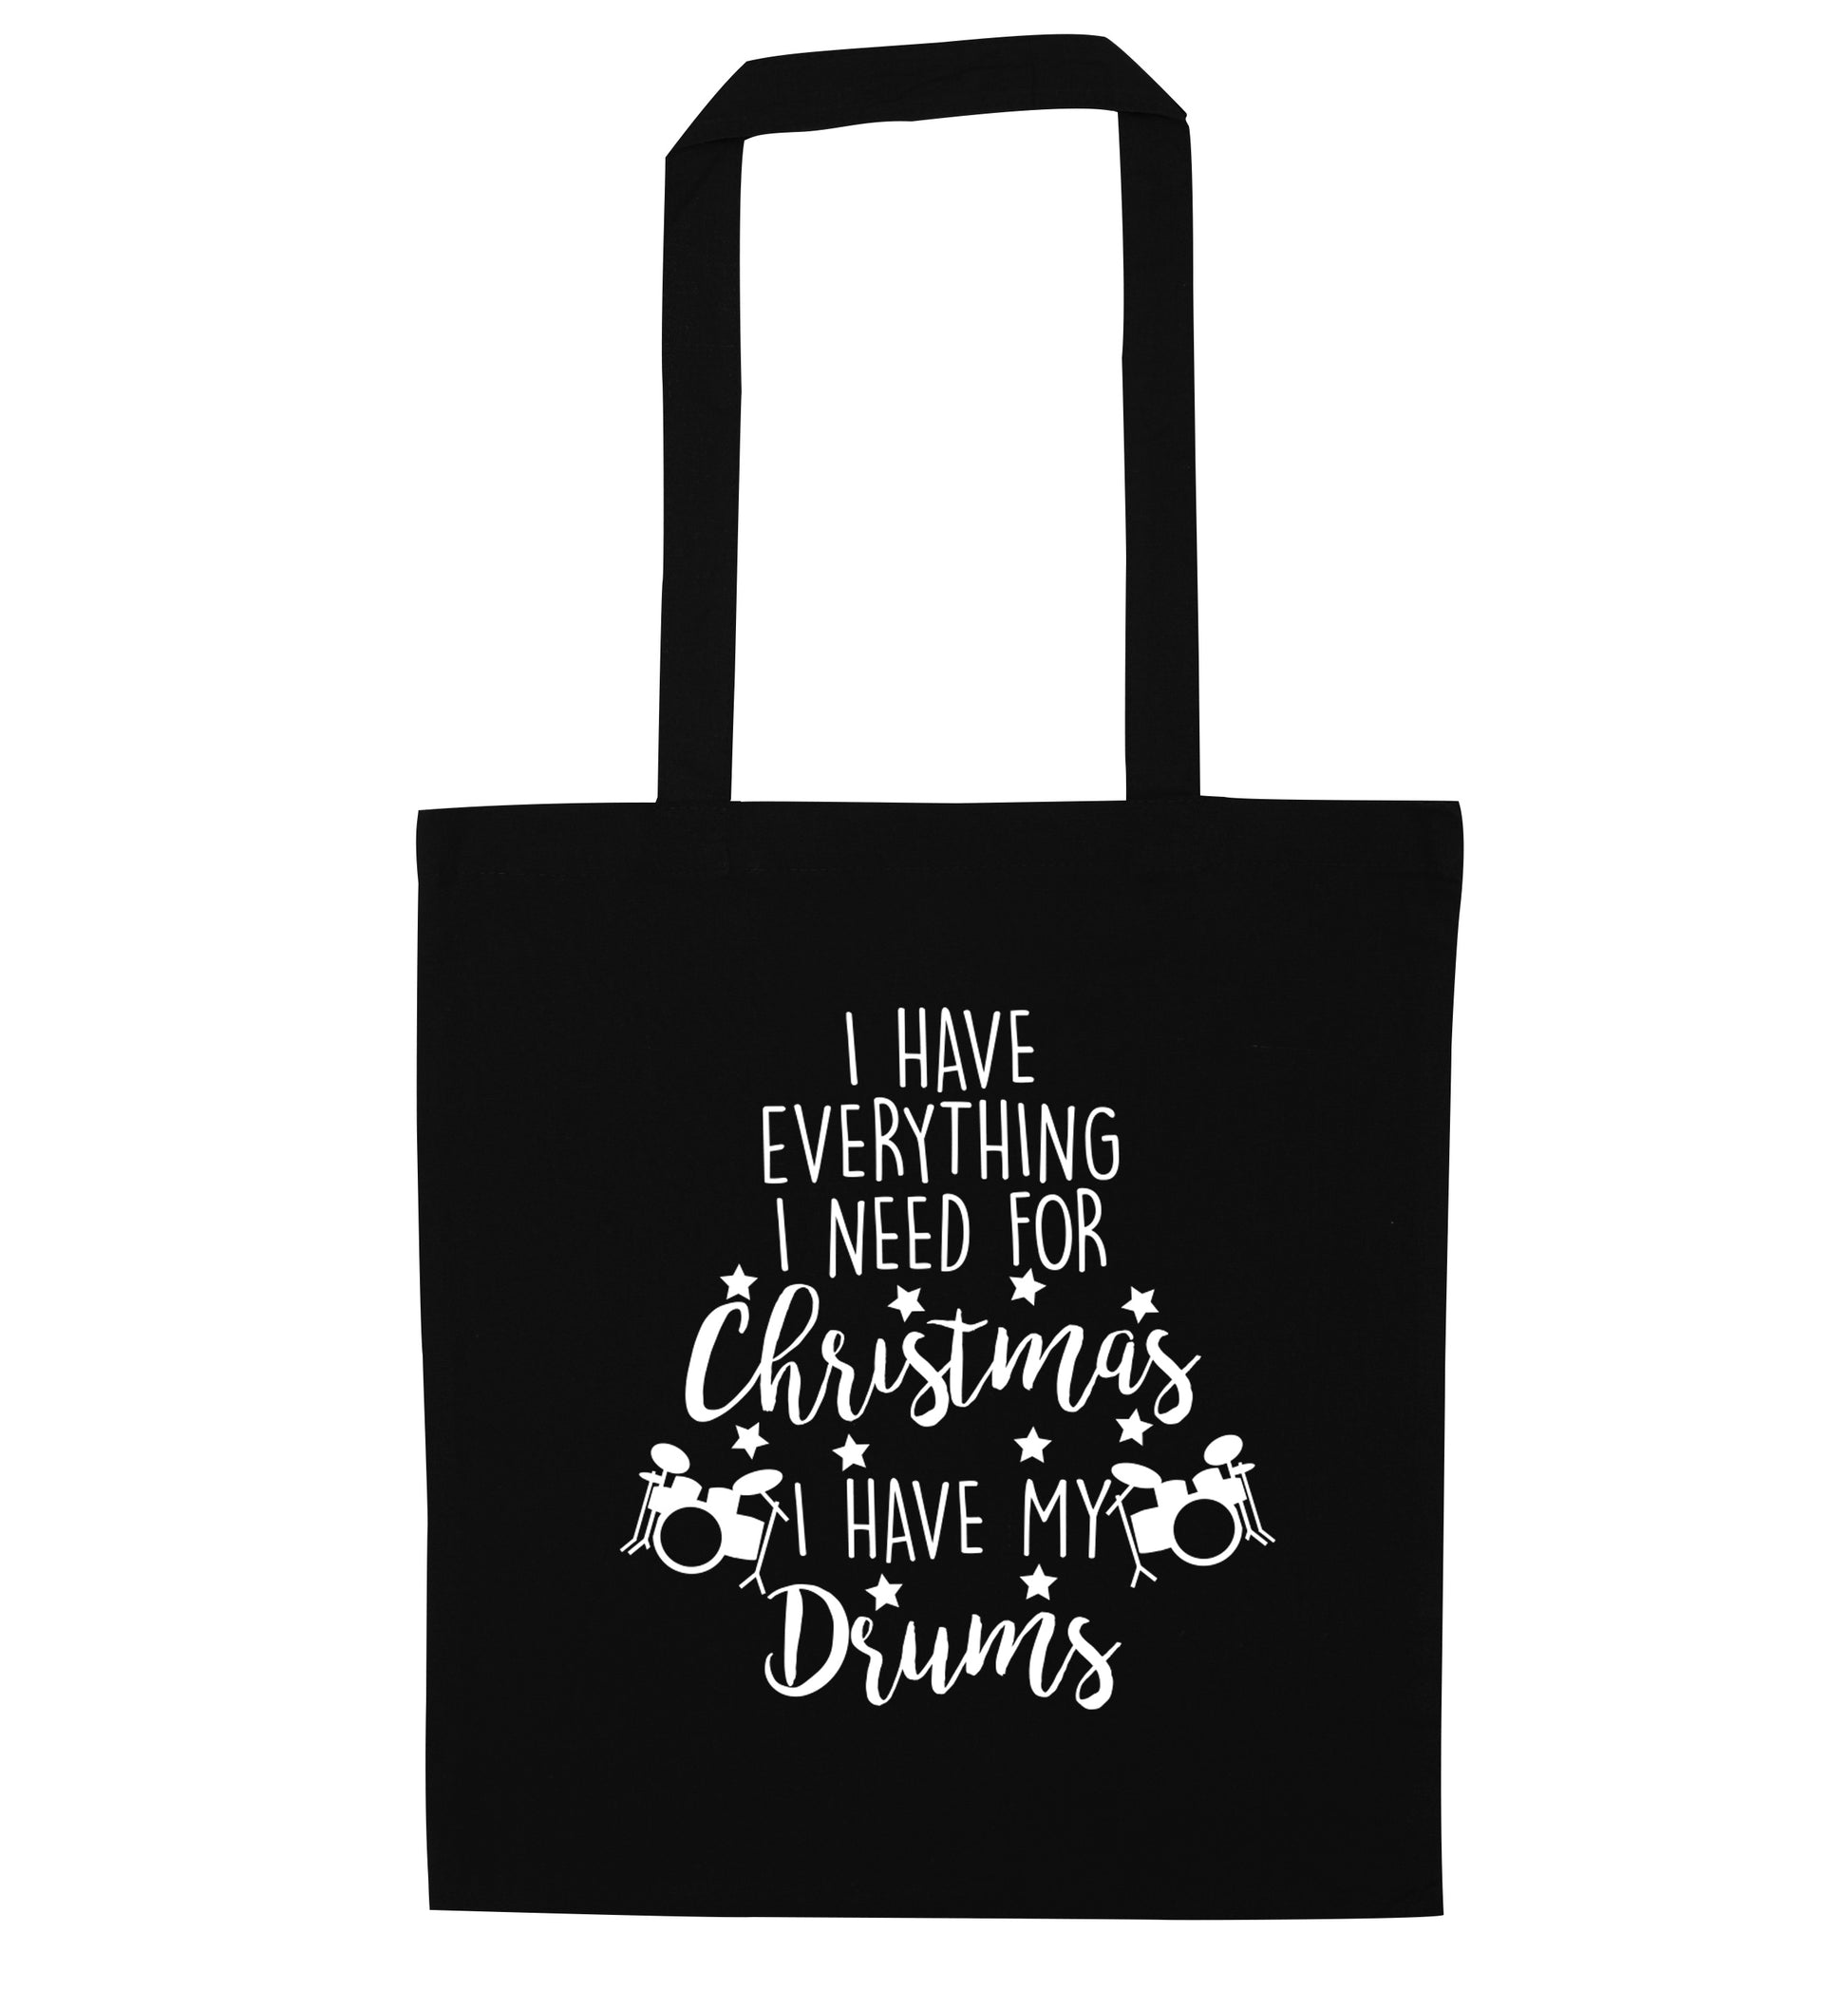 I have everything I need for Christmas I have my drums! black tote bag